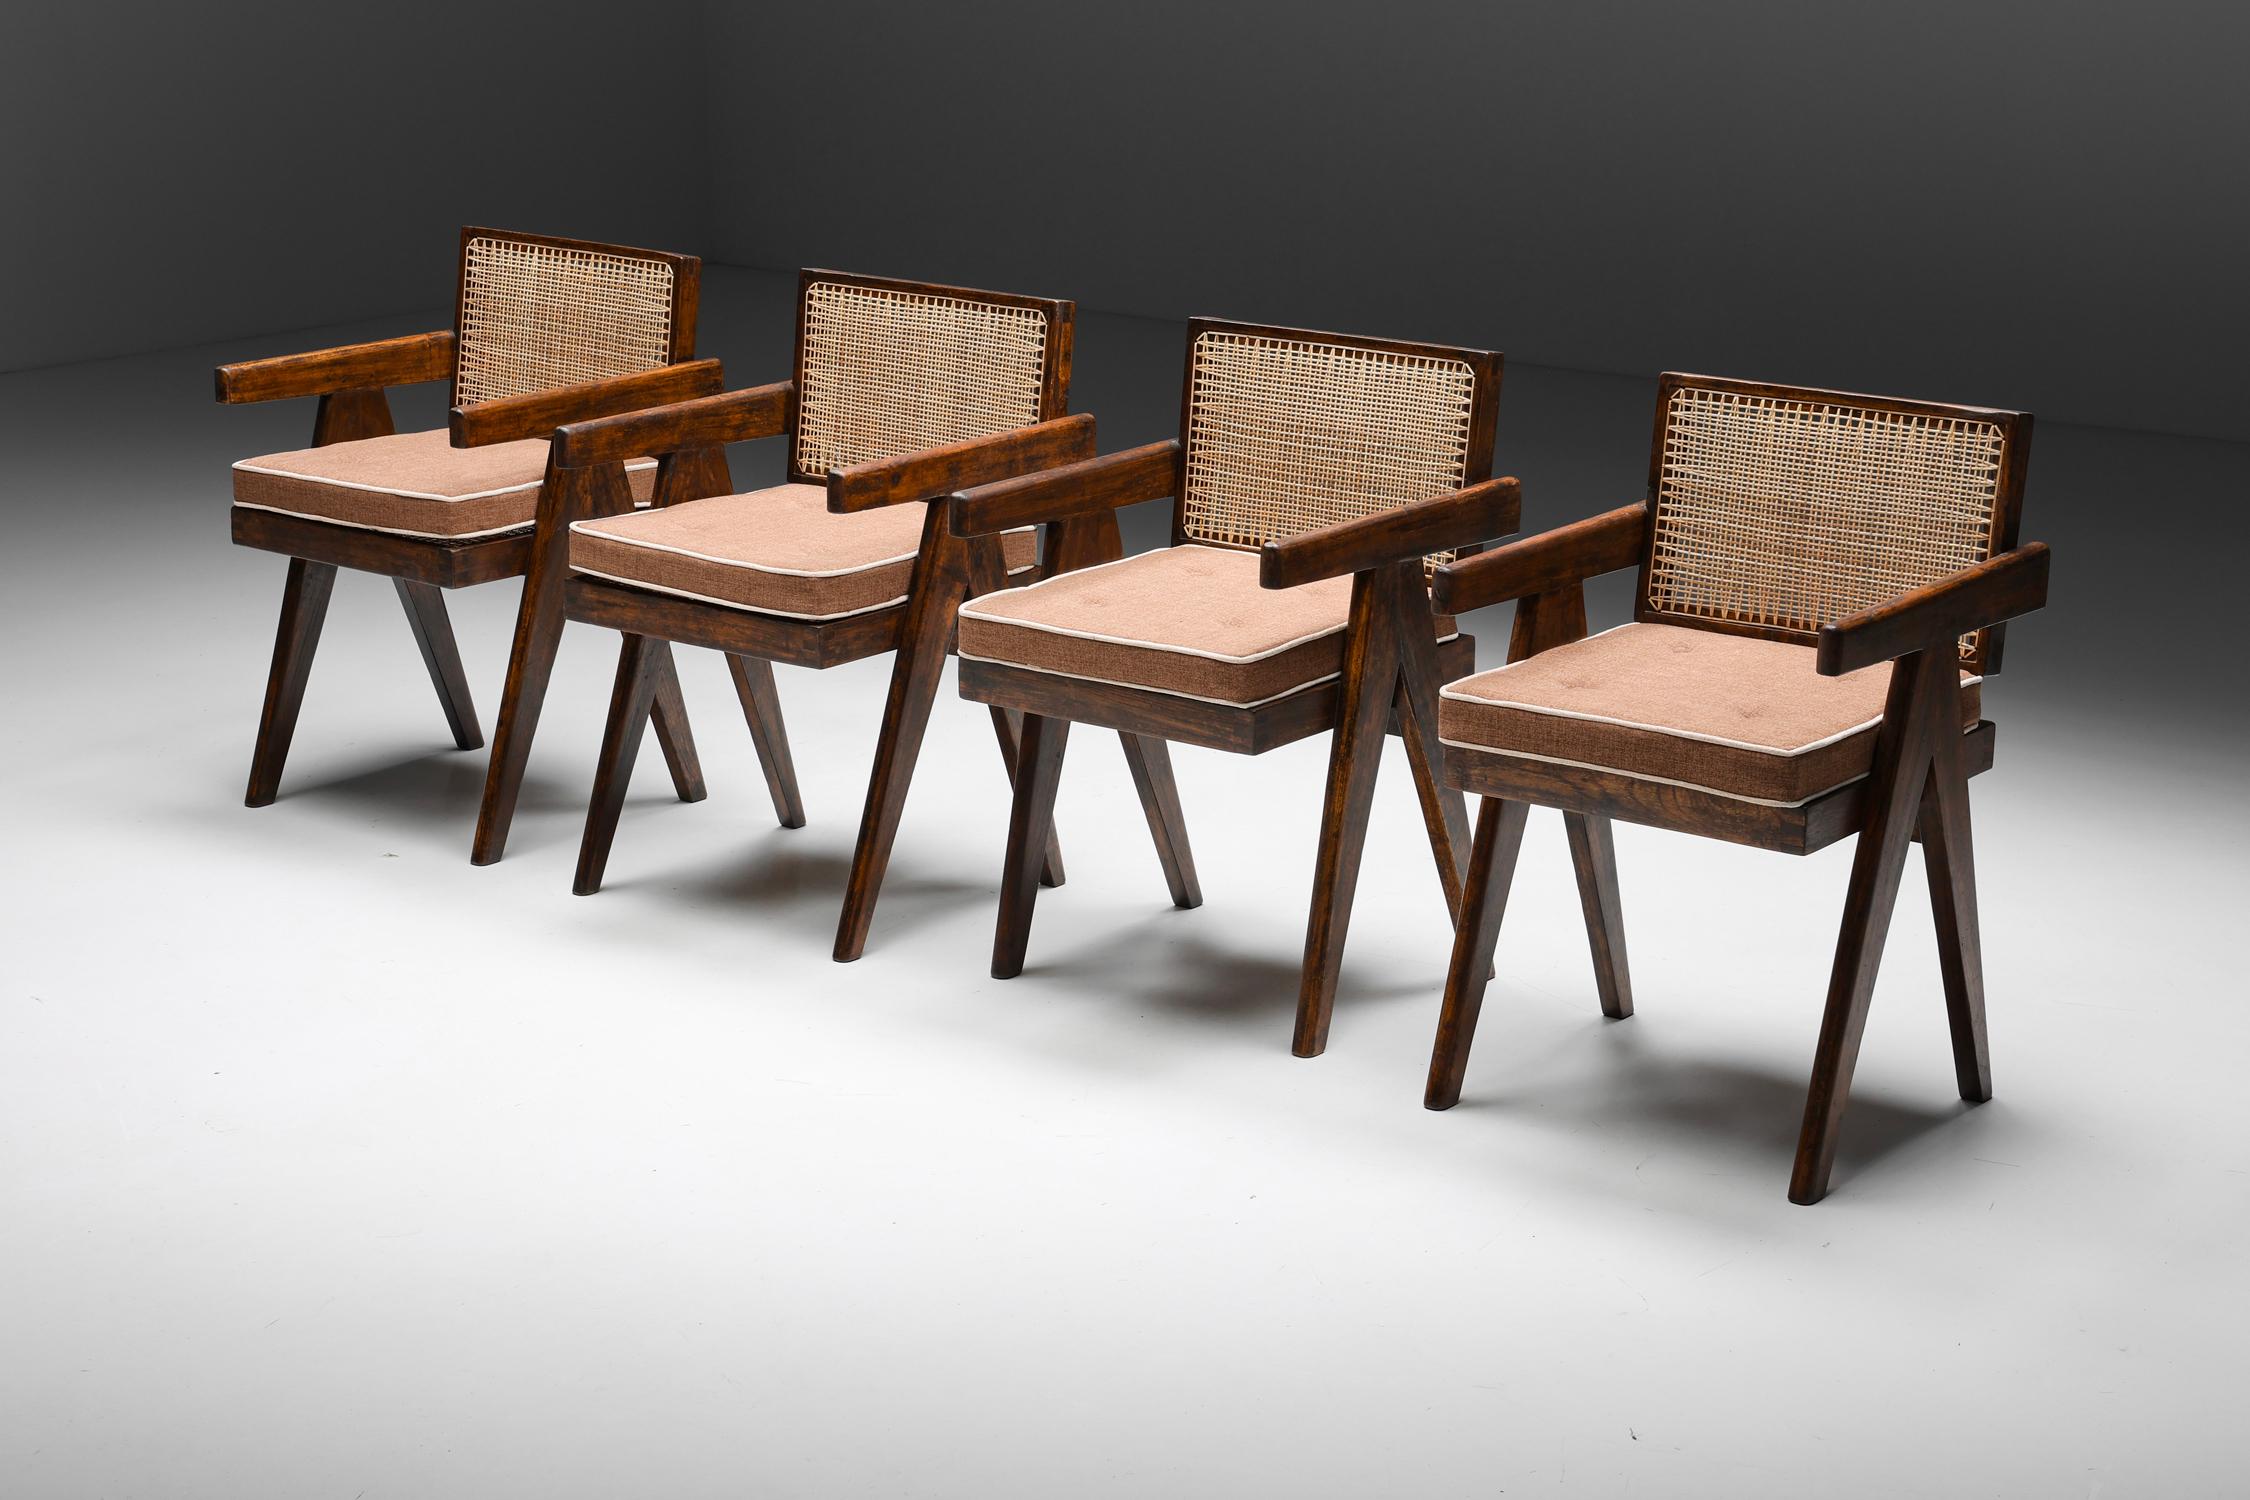 French Office Cane Chairs by Pierre Jeanneret, PJ-SI-28-A, Rosewood, Chandigarh, 1955